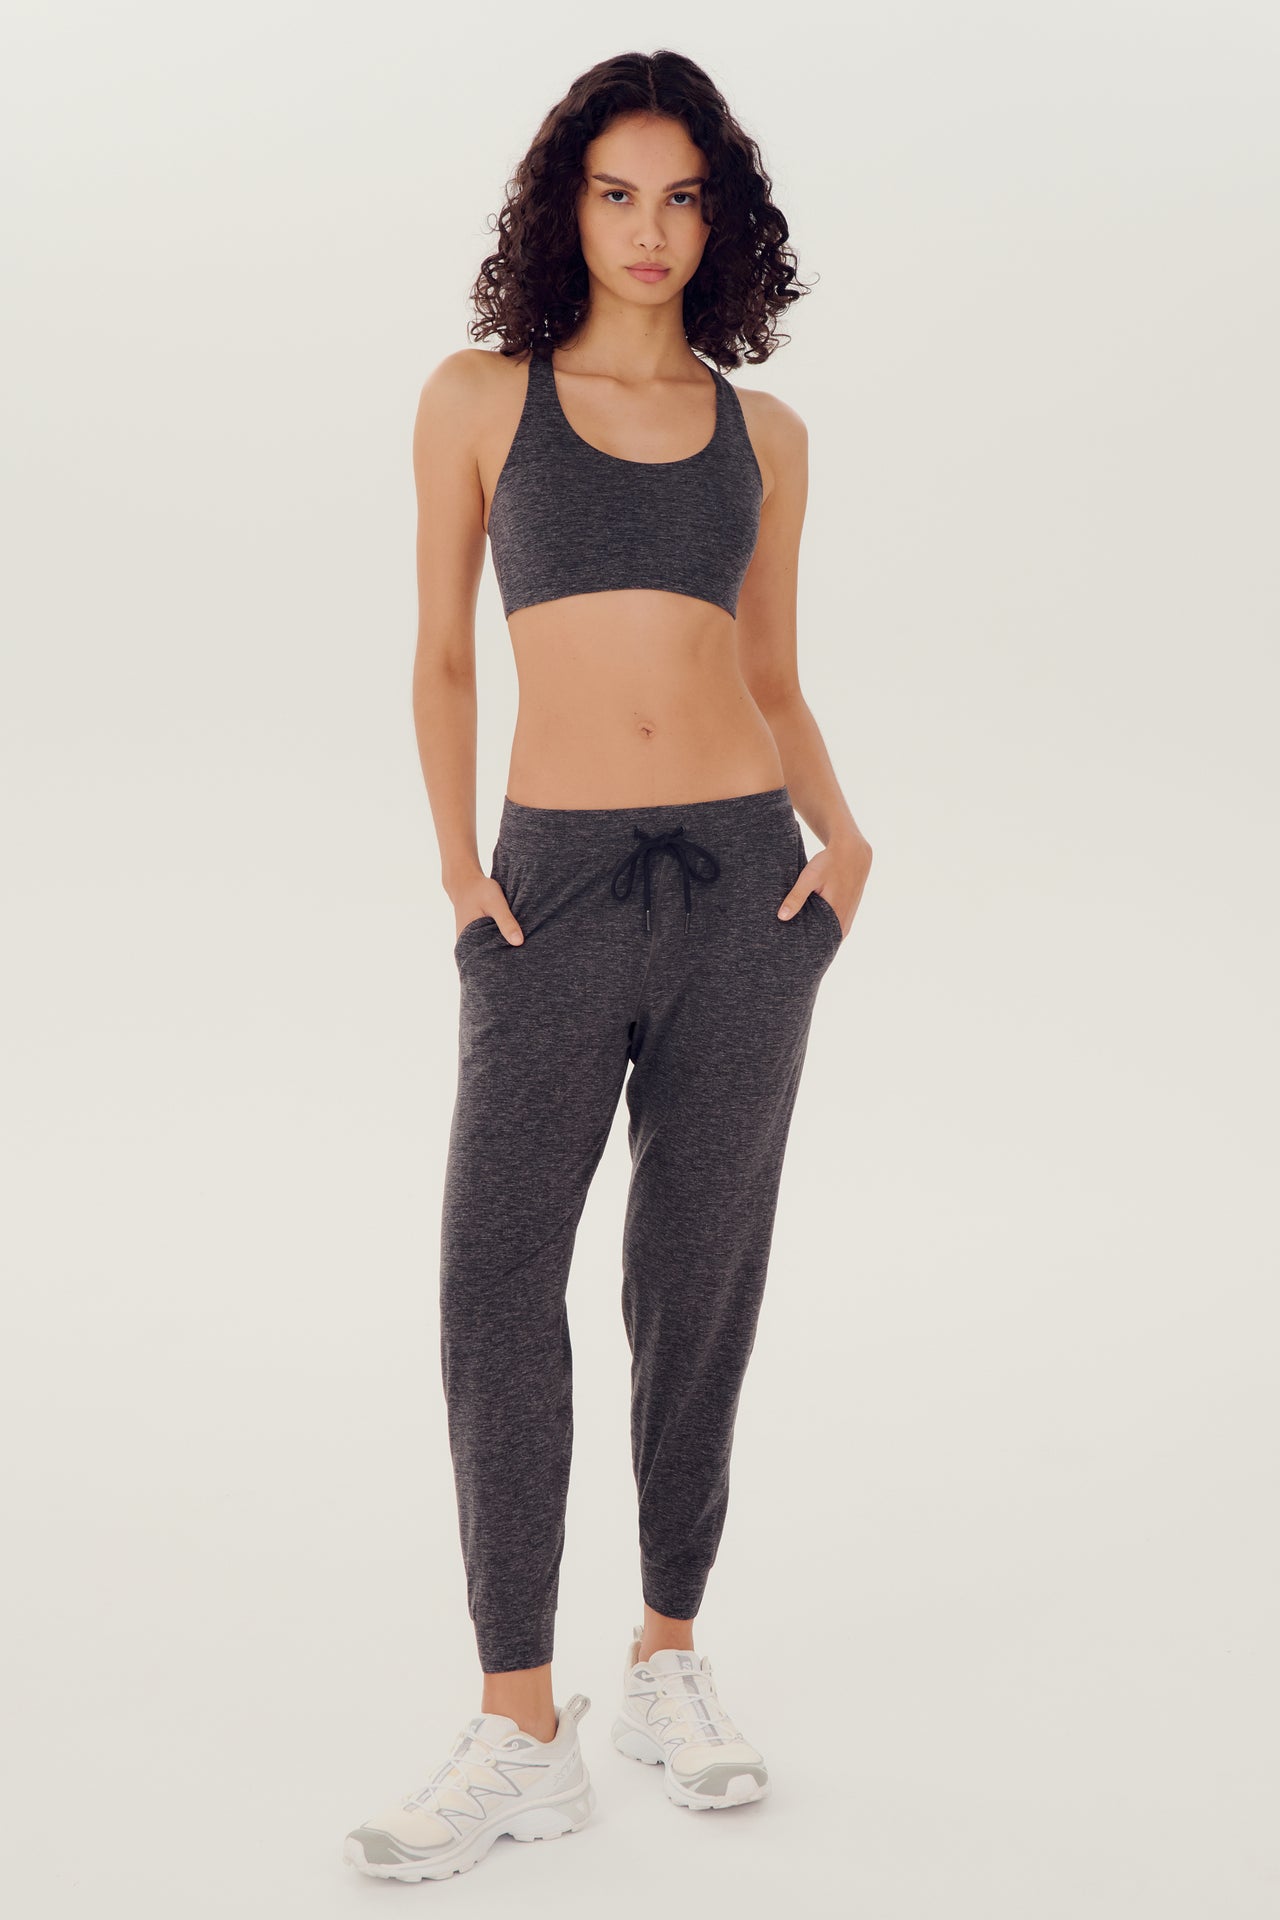 Full front view of girl wearing dark grey sweatpants with black tie around waistband and a dark grey sports bra with white shoes